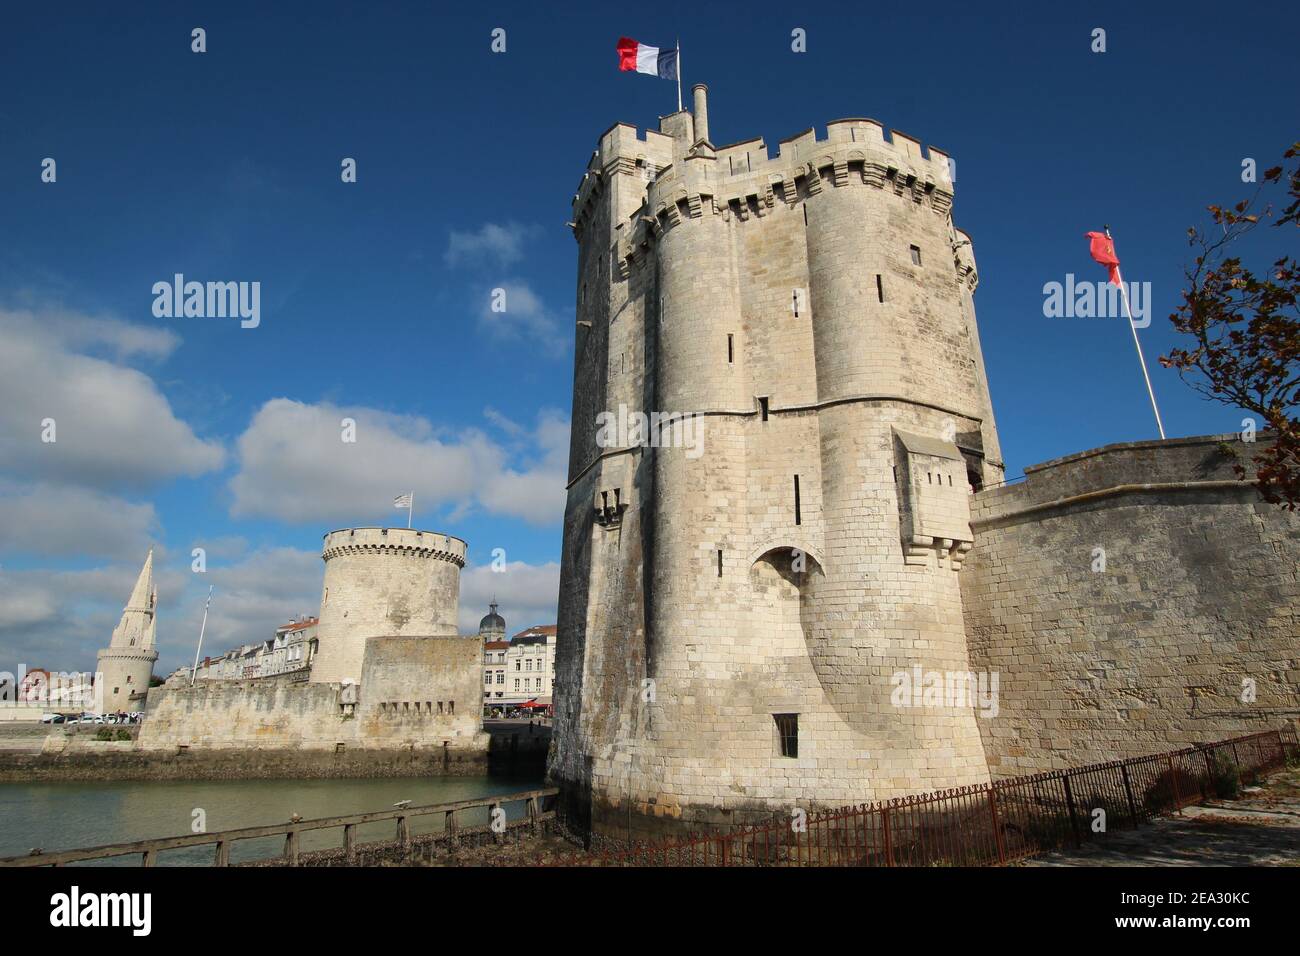 The medieval towers of La Rochelle in France Stock Photo